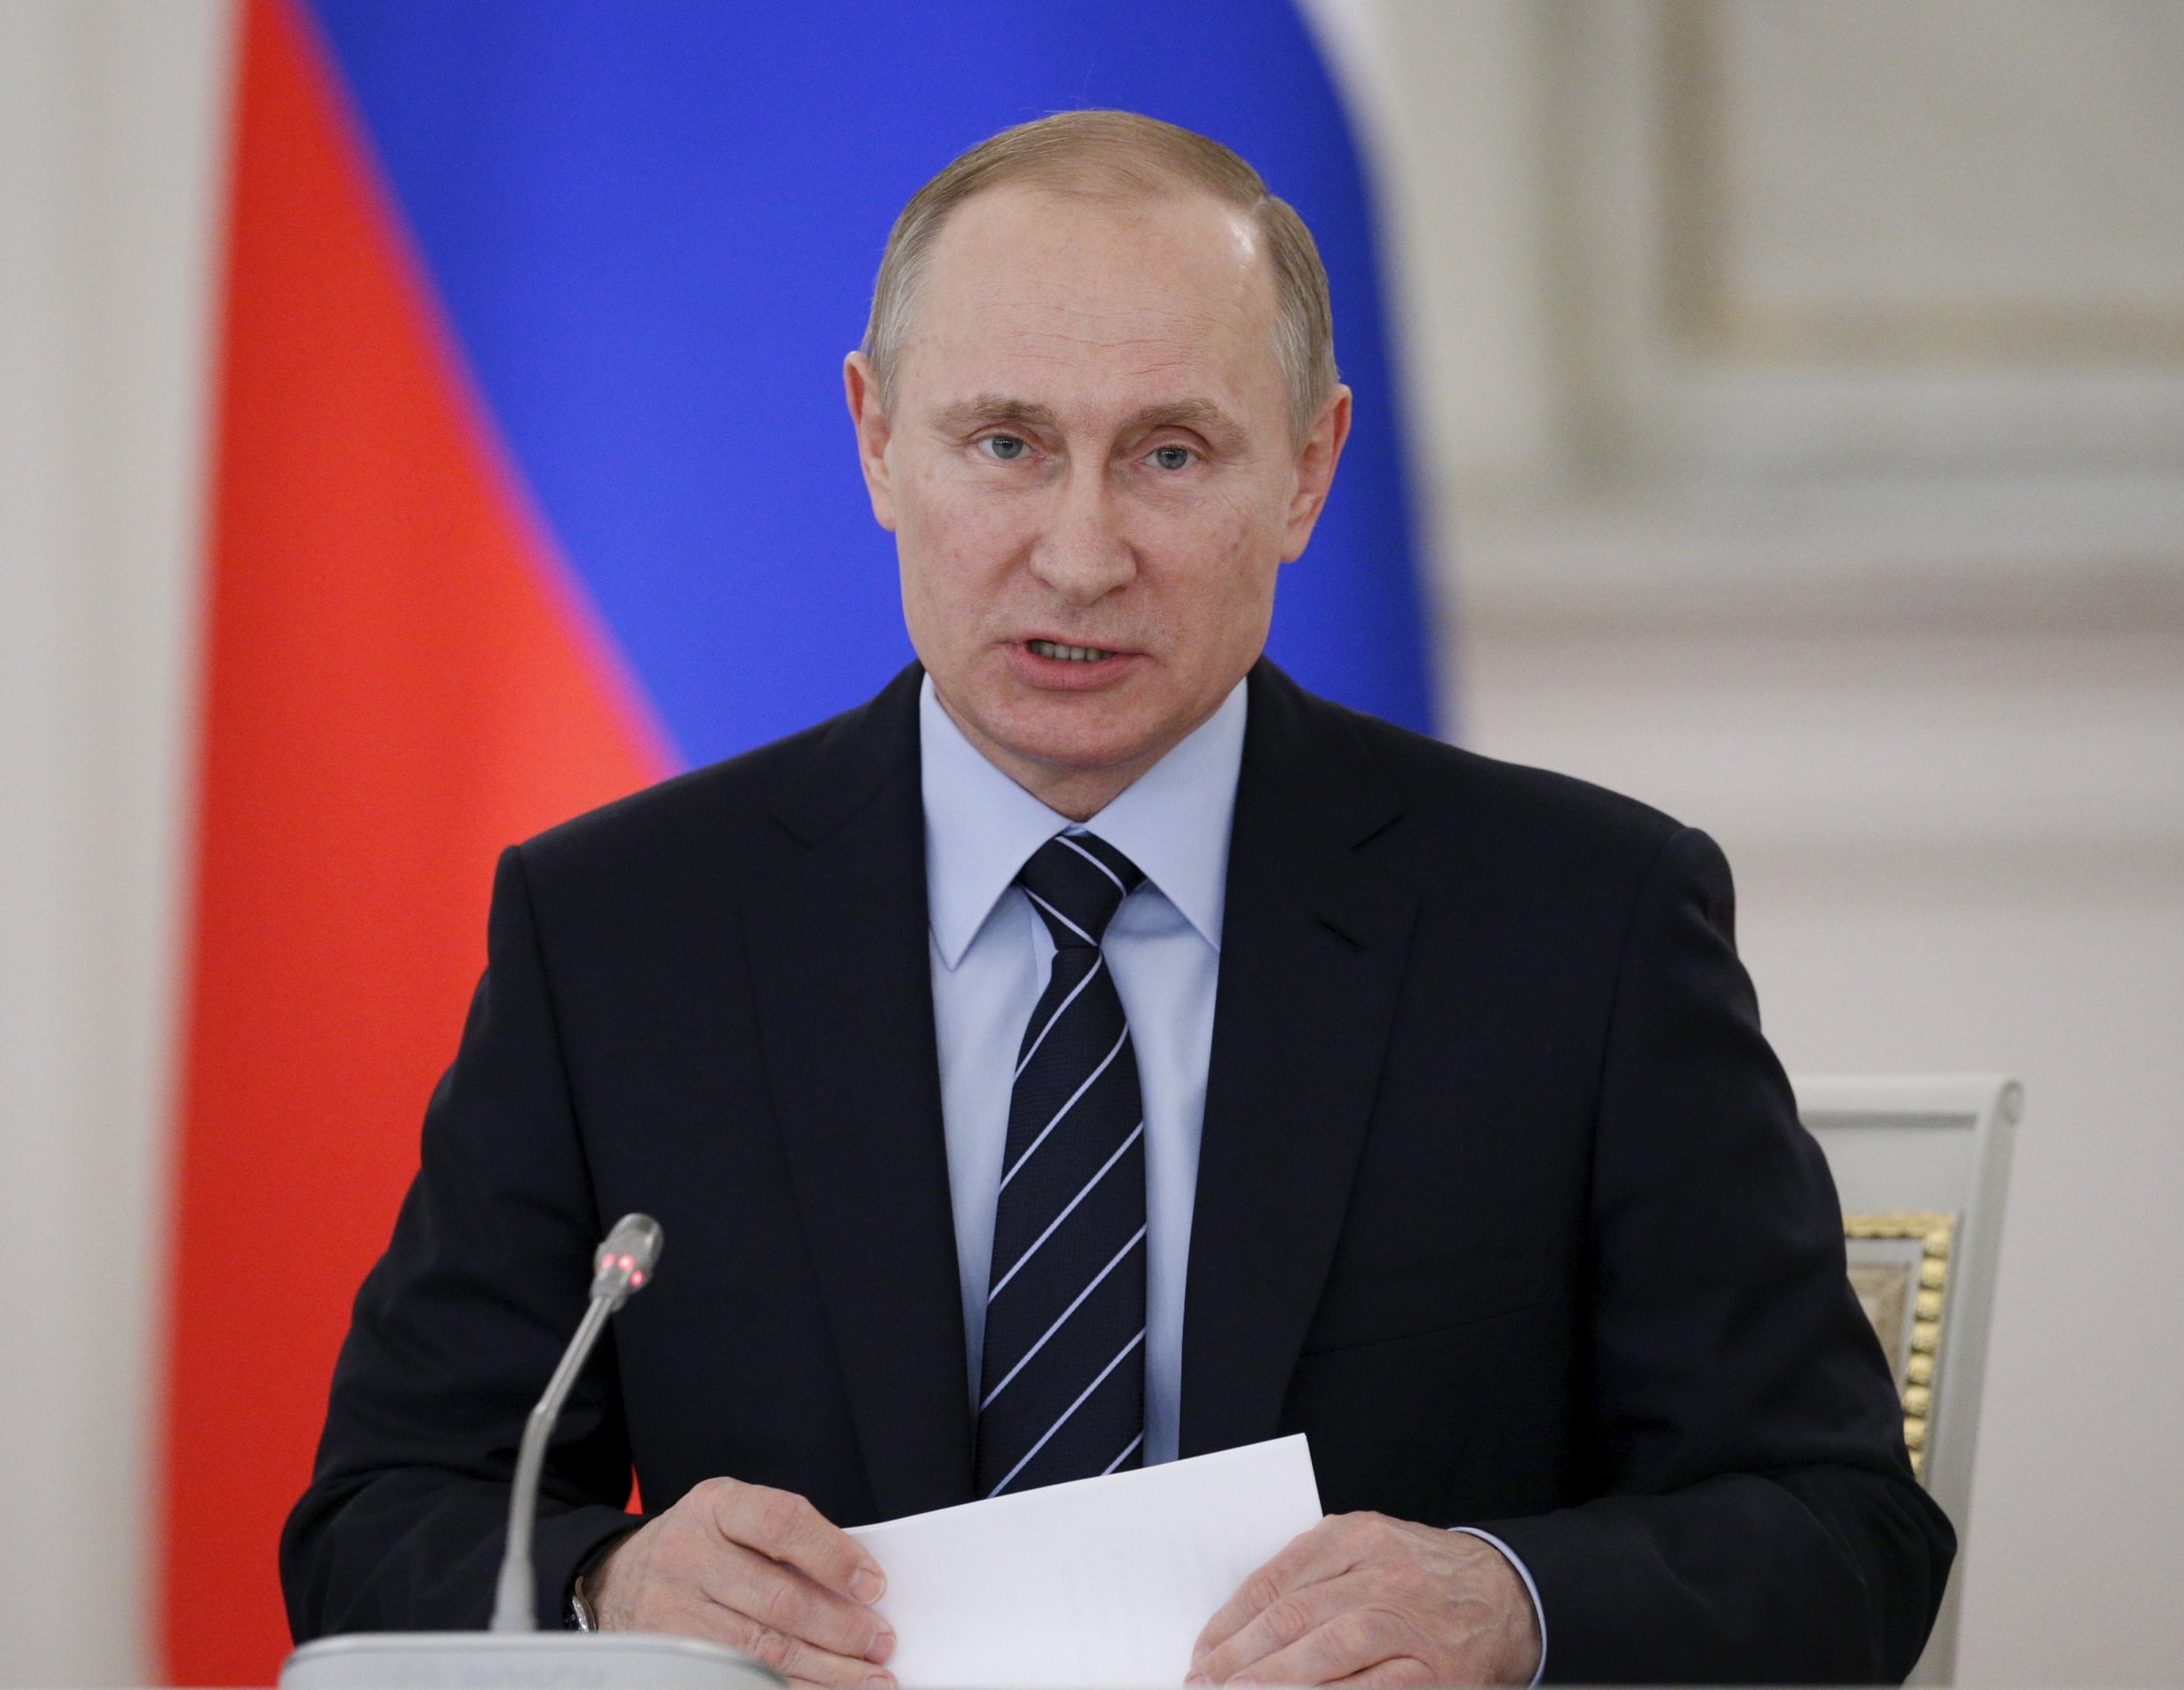 Putin speaks at Moscow